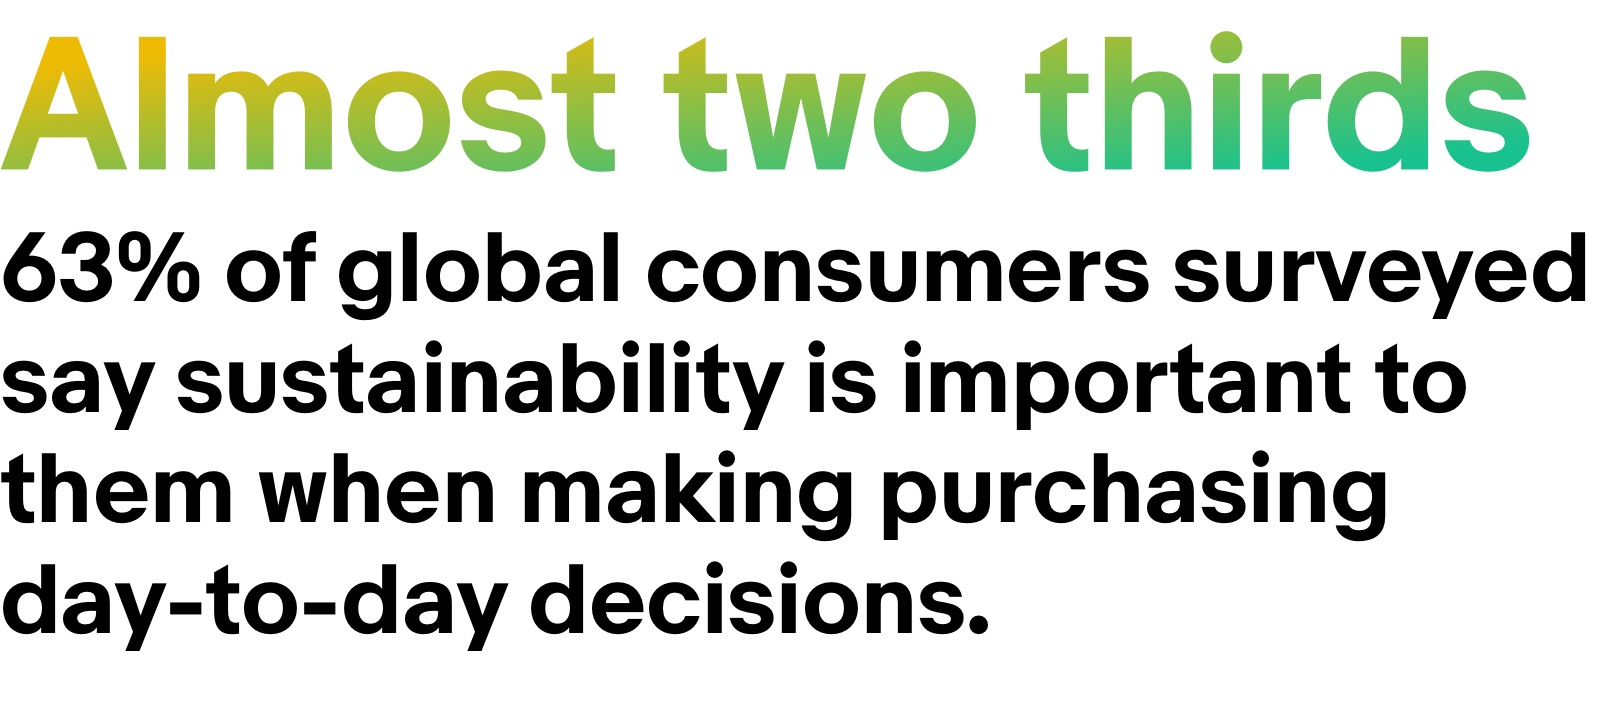 Almost two thirds 63% of global consumers surveyed say sustainability is important to them when making purchasing decisions.